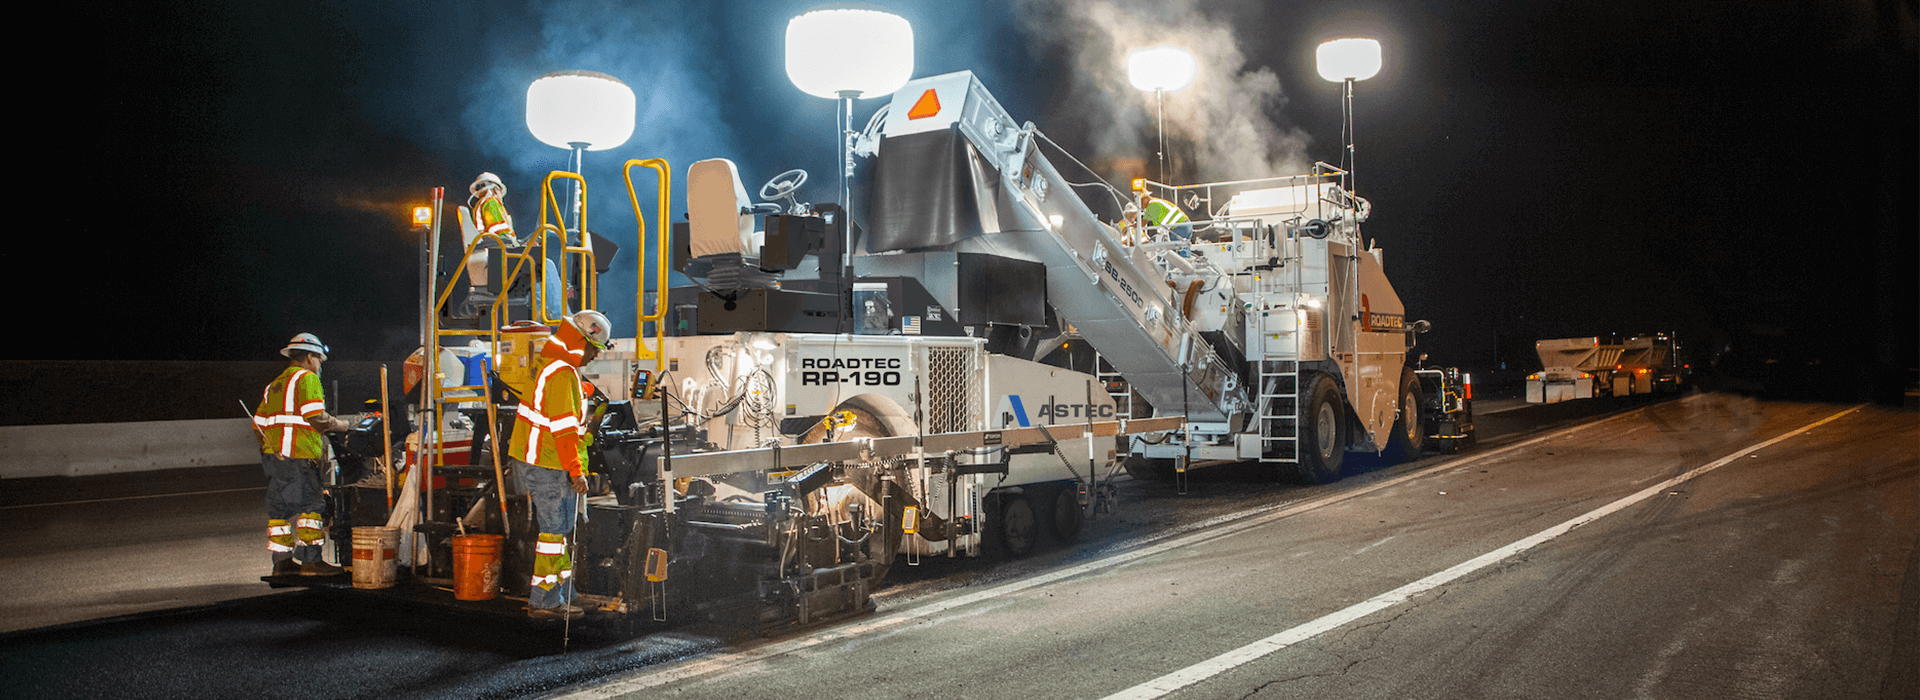 Roadtec RP-190 highway class asphalt paver paving at night with a Roadtec Shuttle Buggy Material Transfer Vehicle